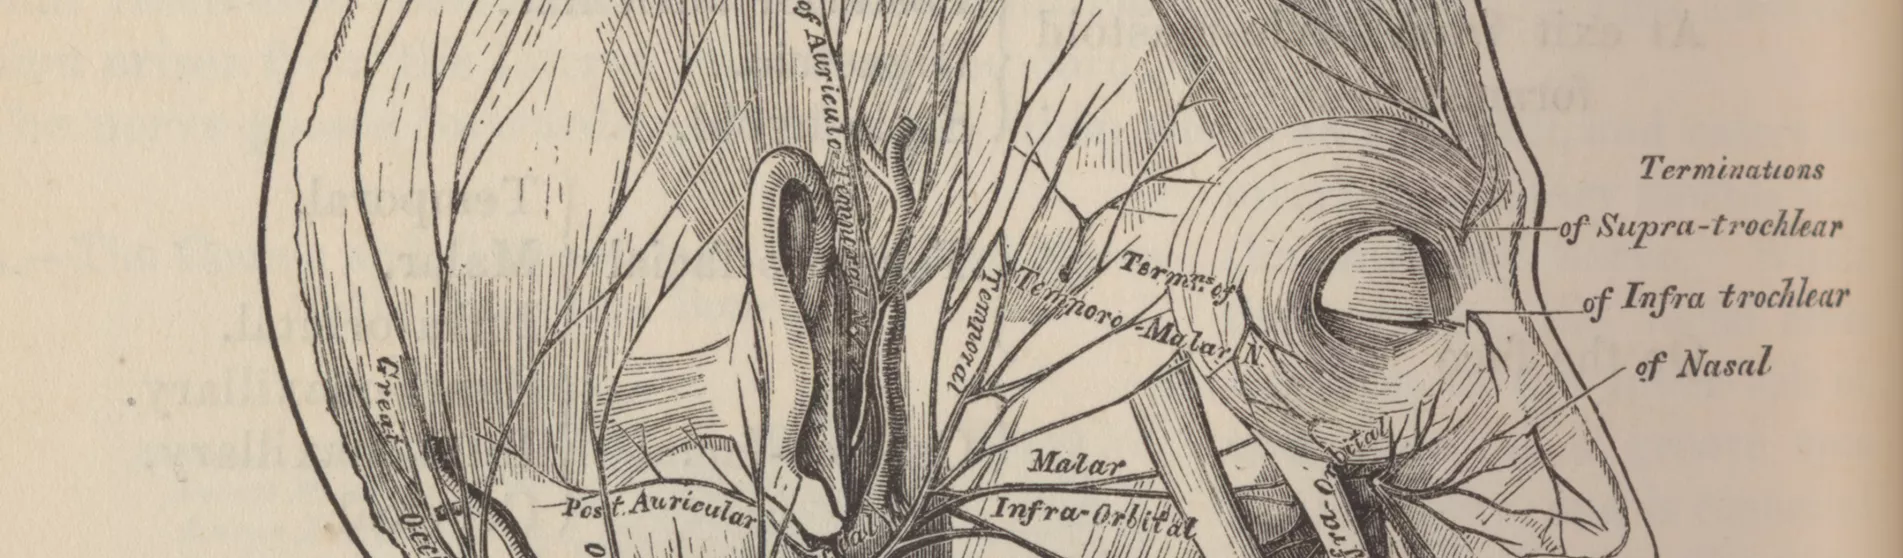 Cross section of a skull showing veins and arteries